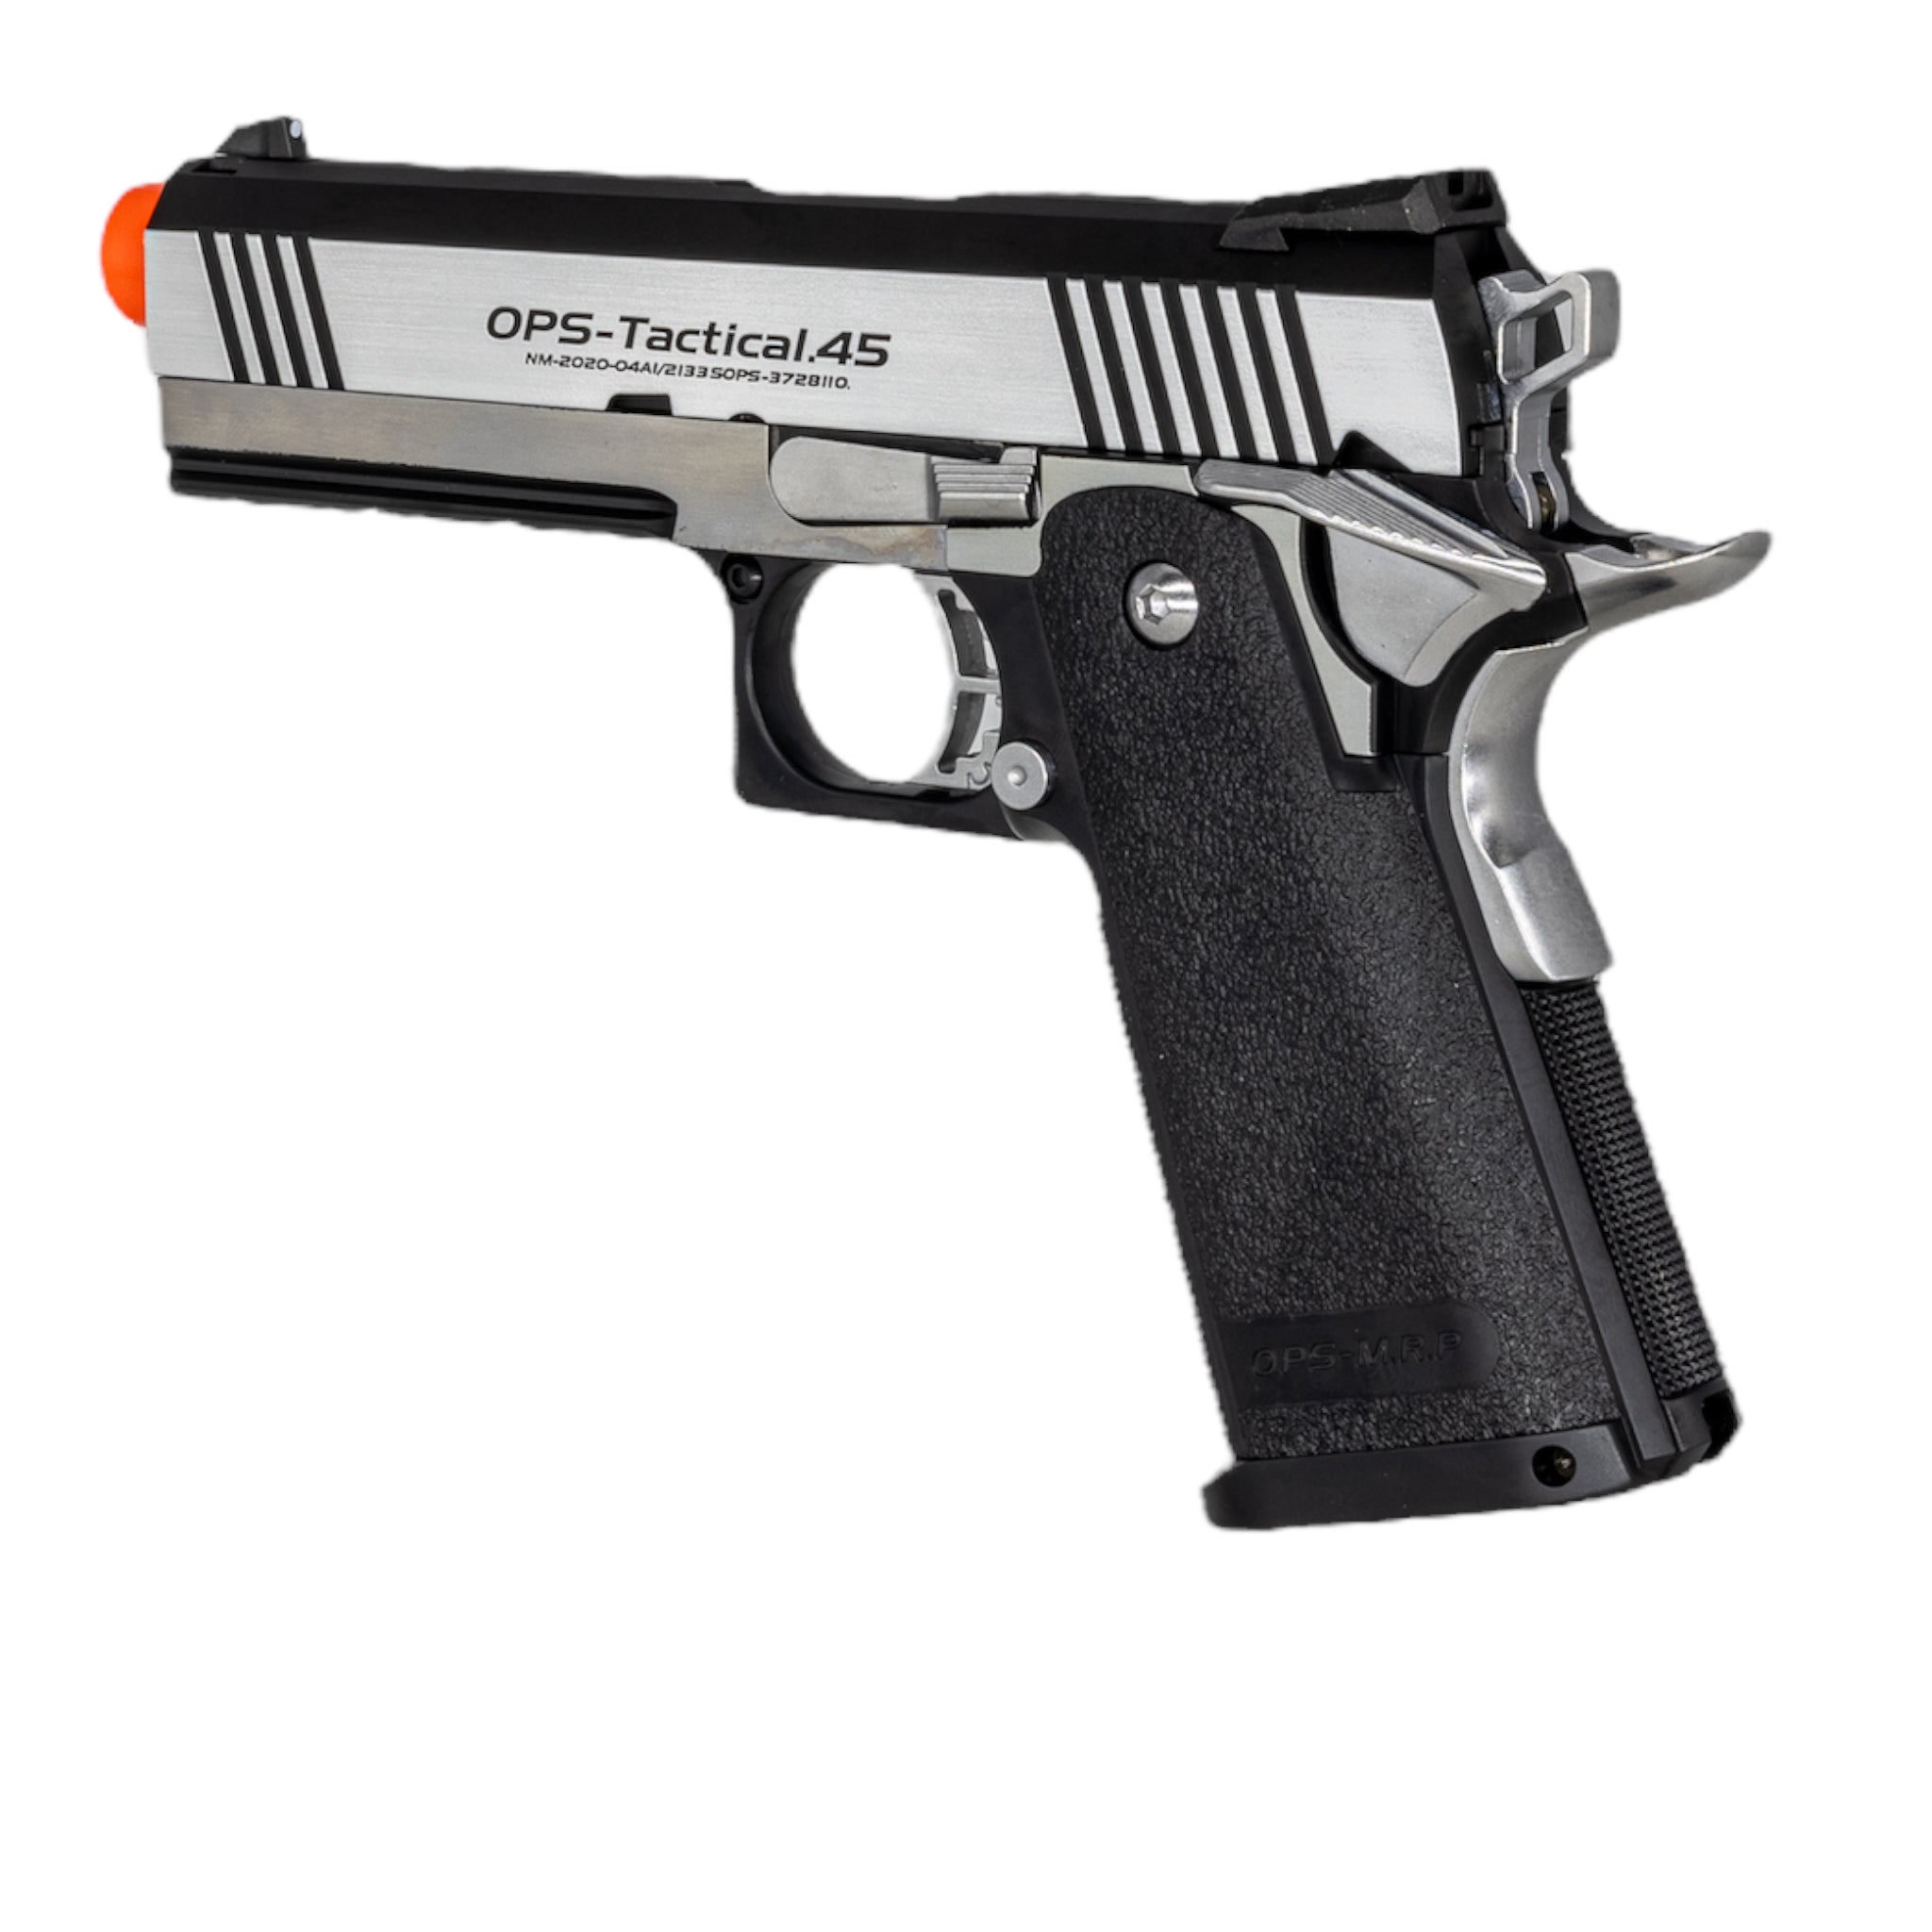 Elite Force 1911 Tactical Blowback Gas Gun (CO2) - Stainless Silver –  Airsoft Atlanta